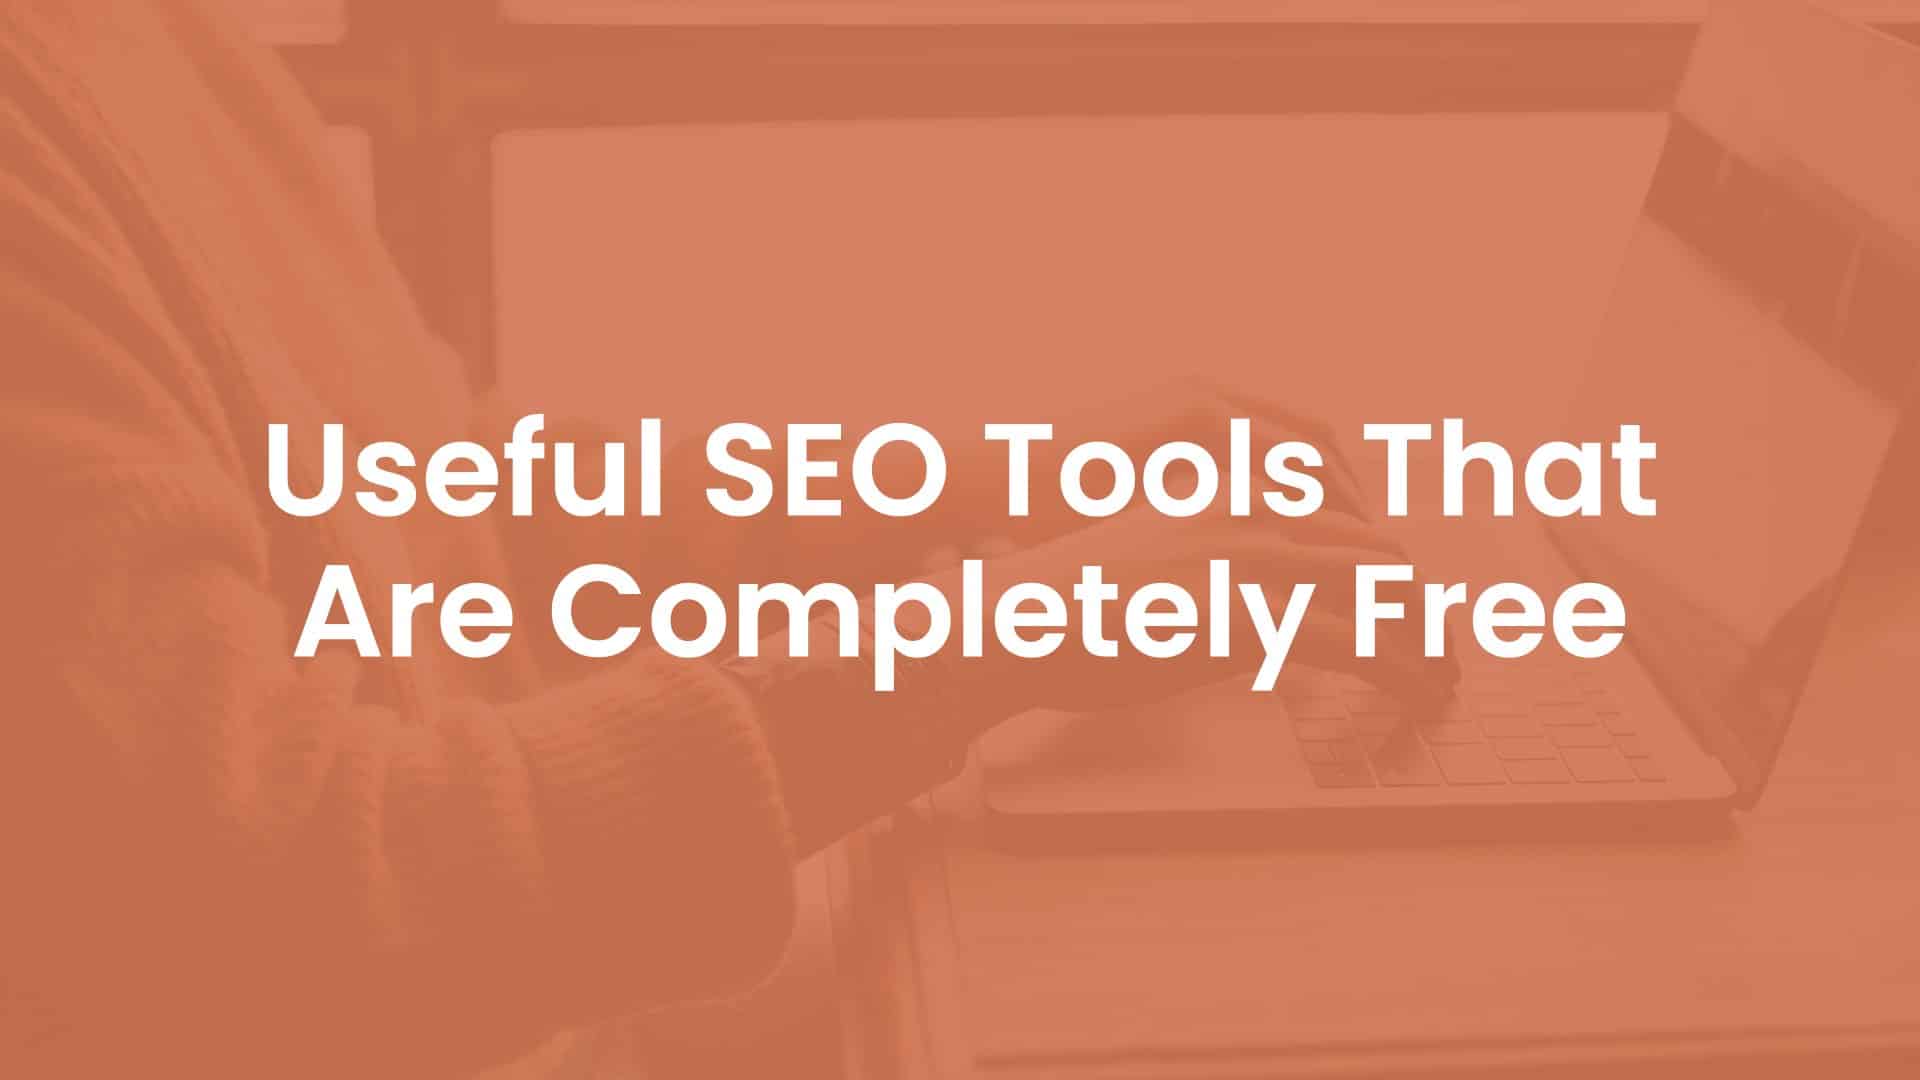 Useful SEO Tools That Are Completely Free cover